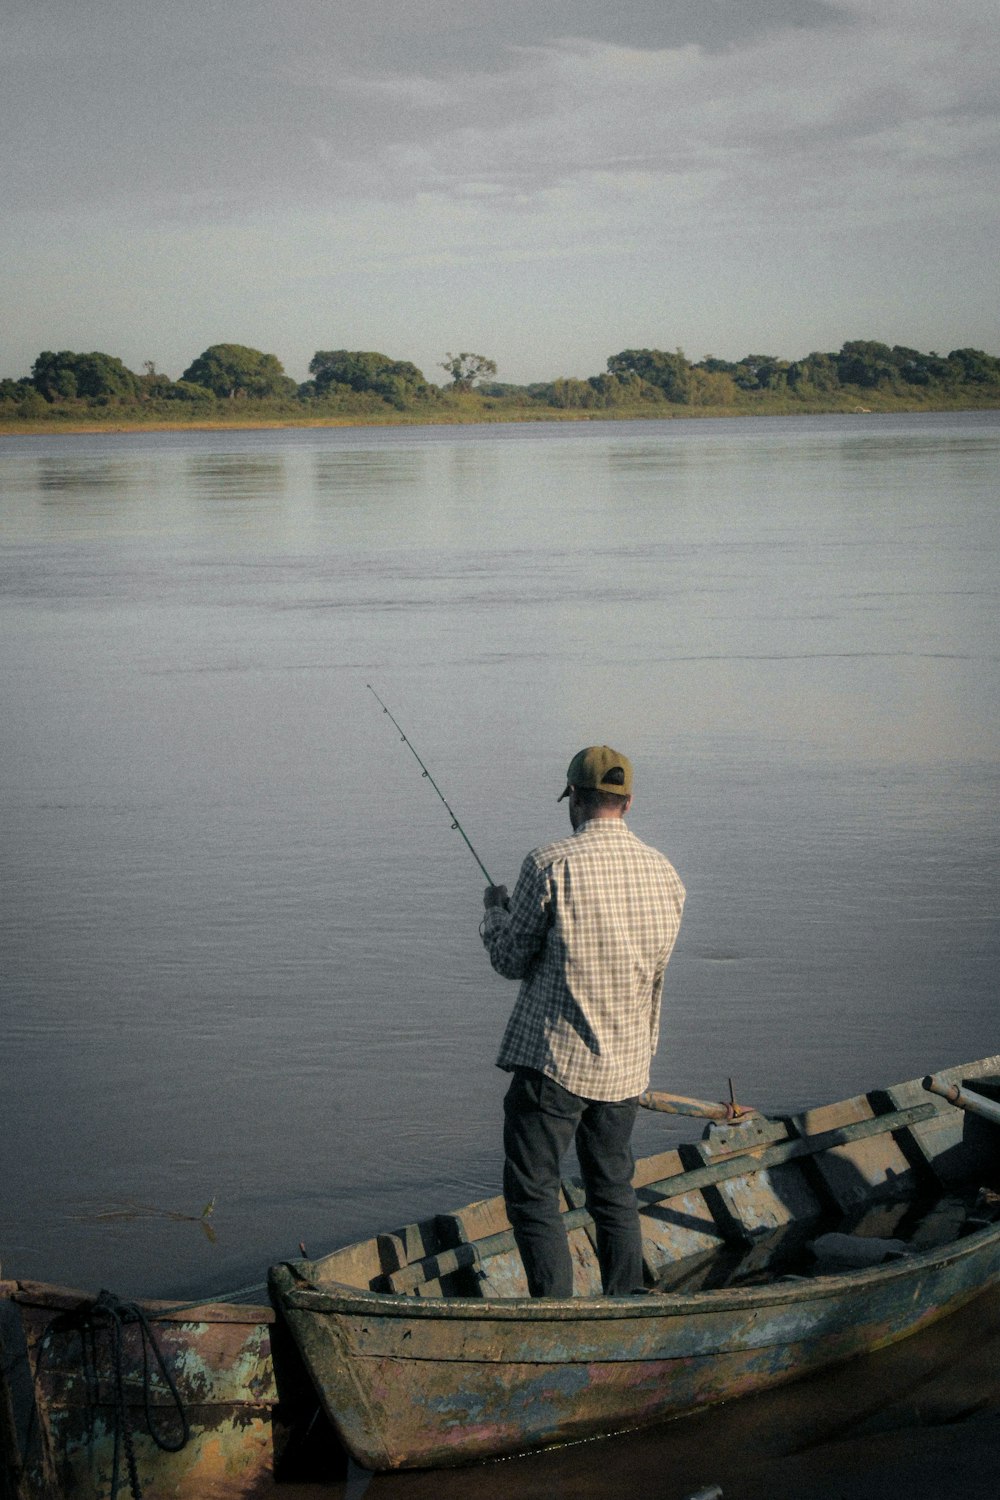 a man standing on a boat holding a fishing rod